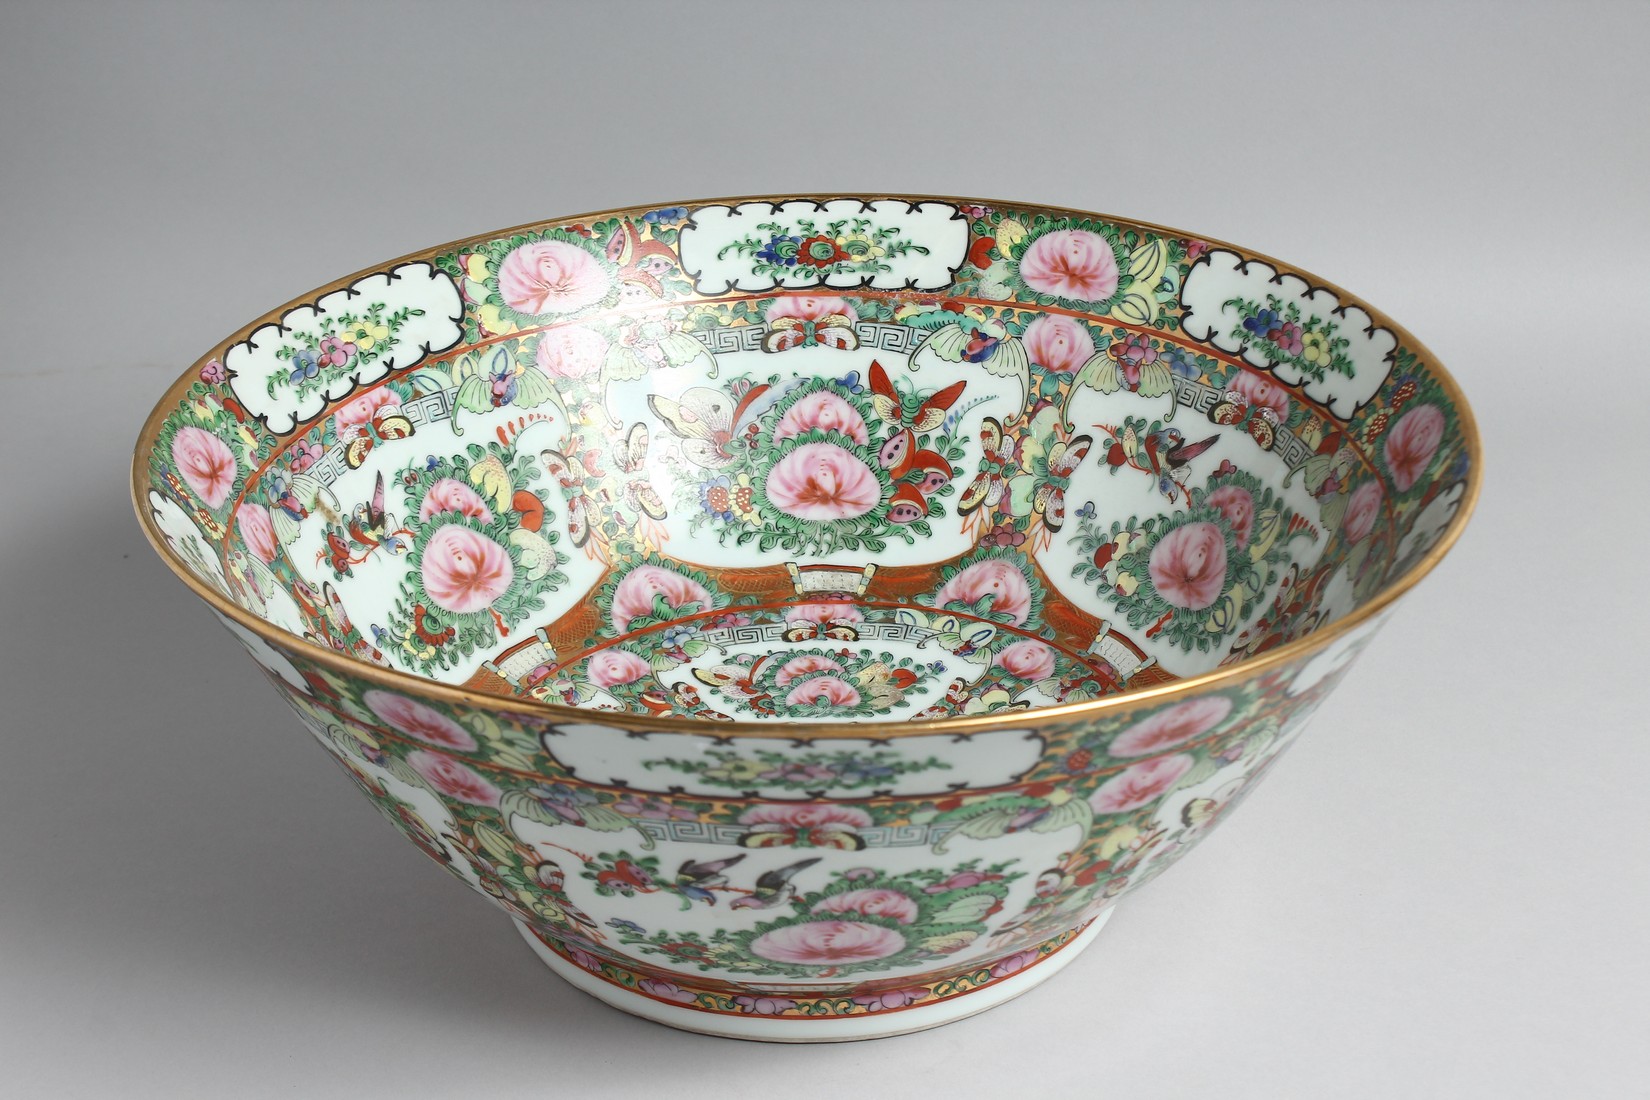 A LARGE CHINESE CANTON PORCELAIN PUNCH BOWL, painted with multiple panels of floral motifs and - Image 6 of 6